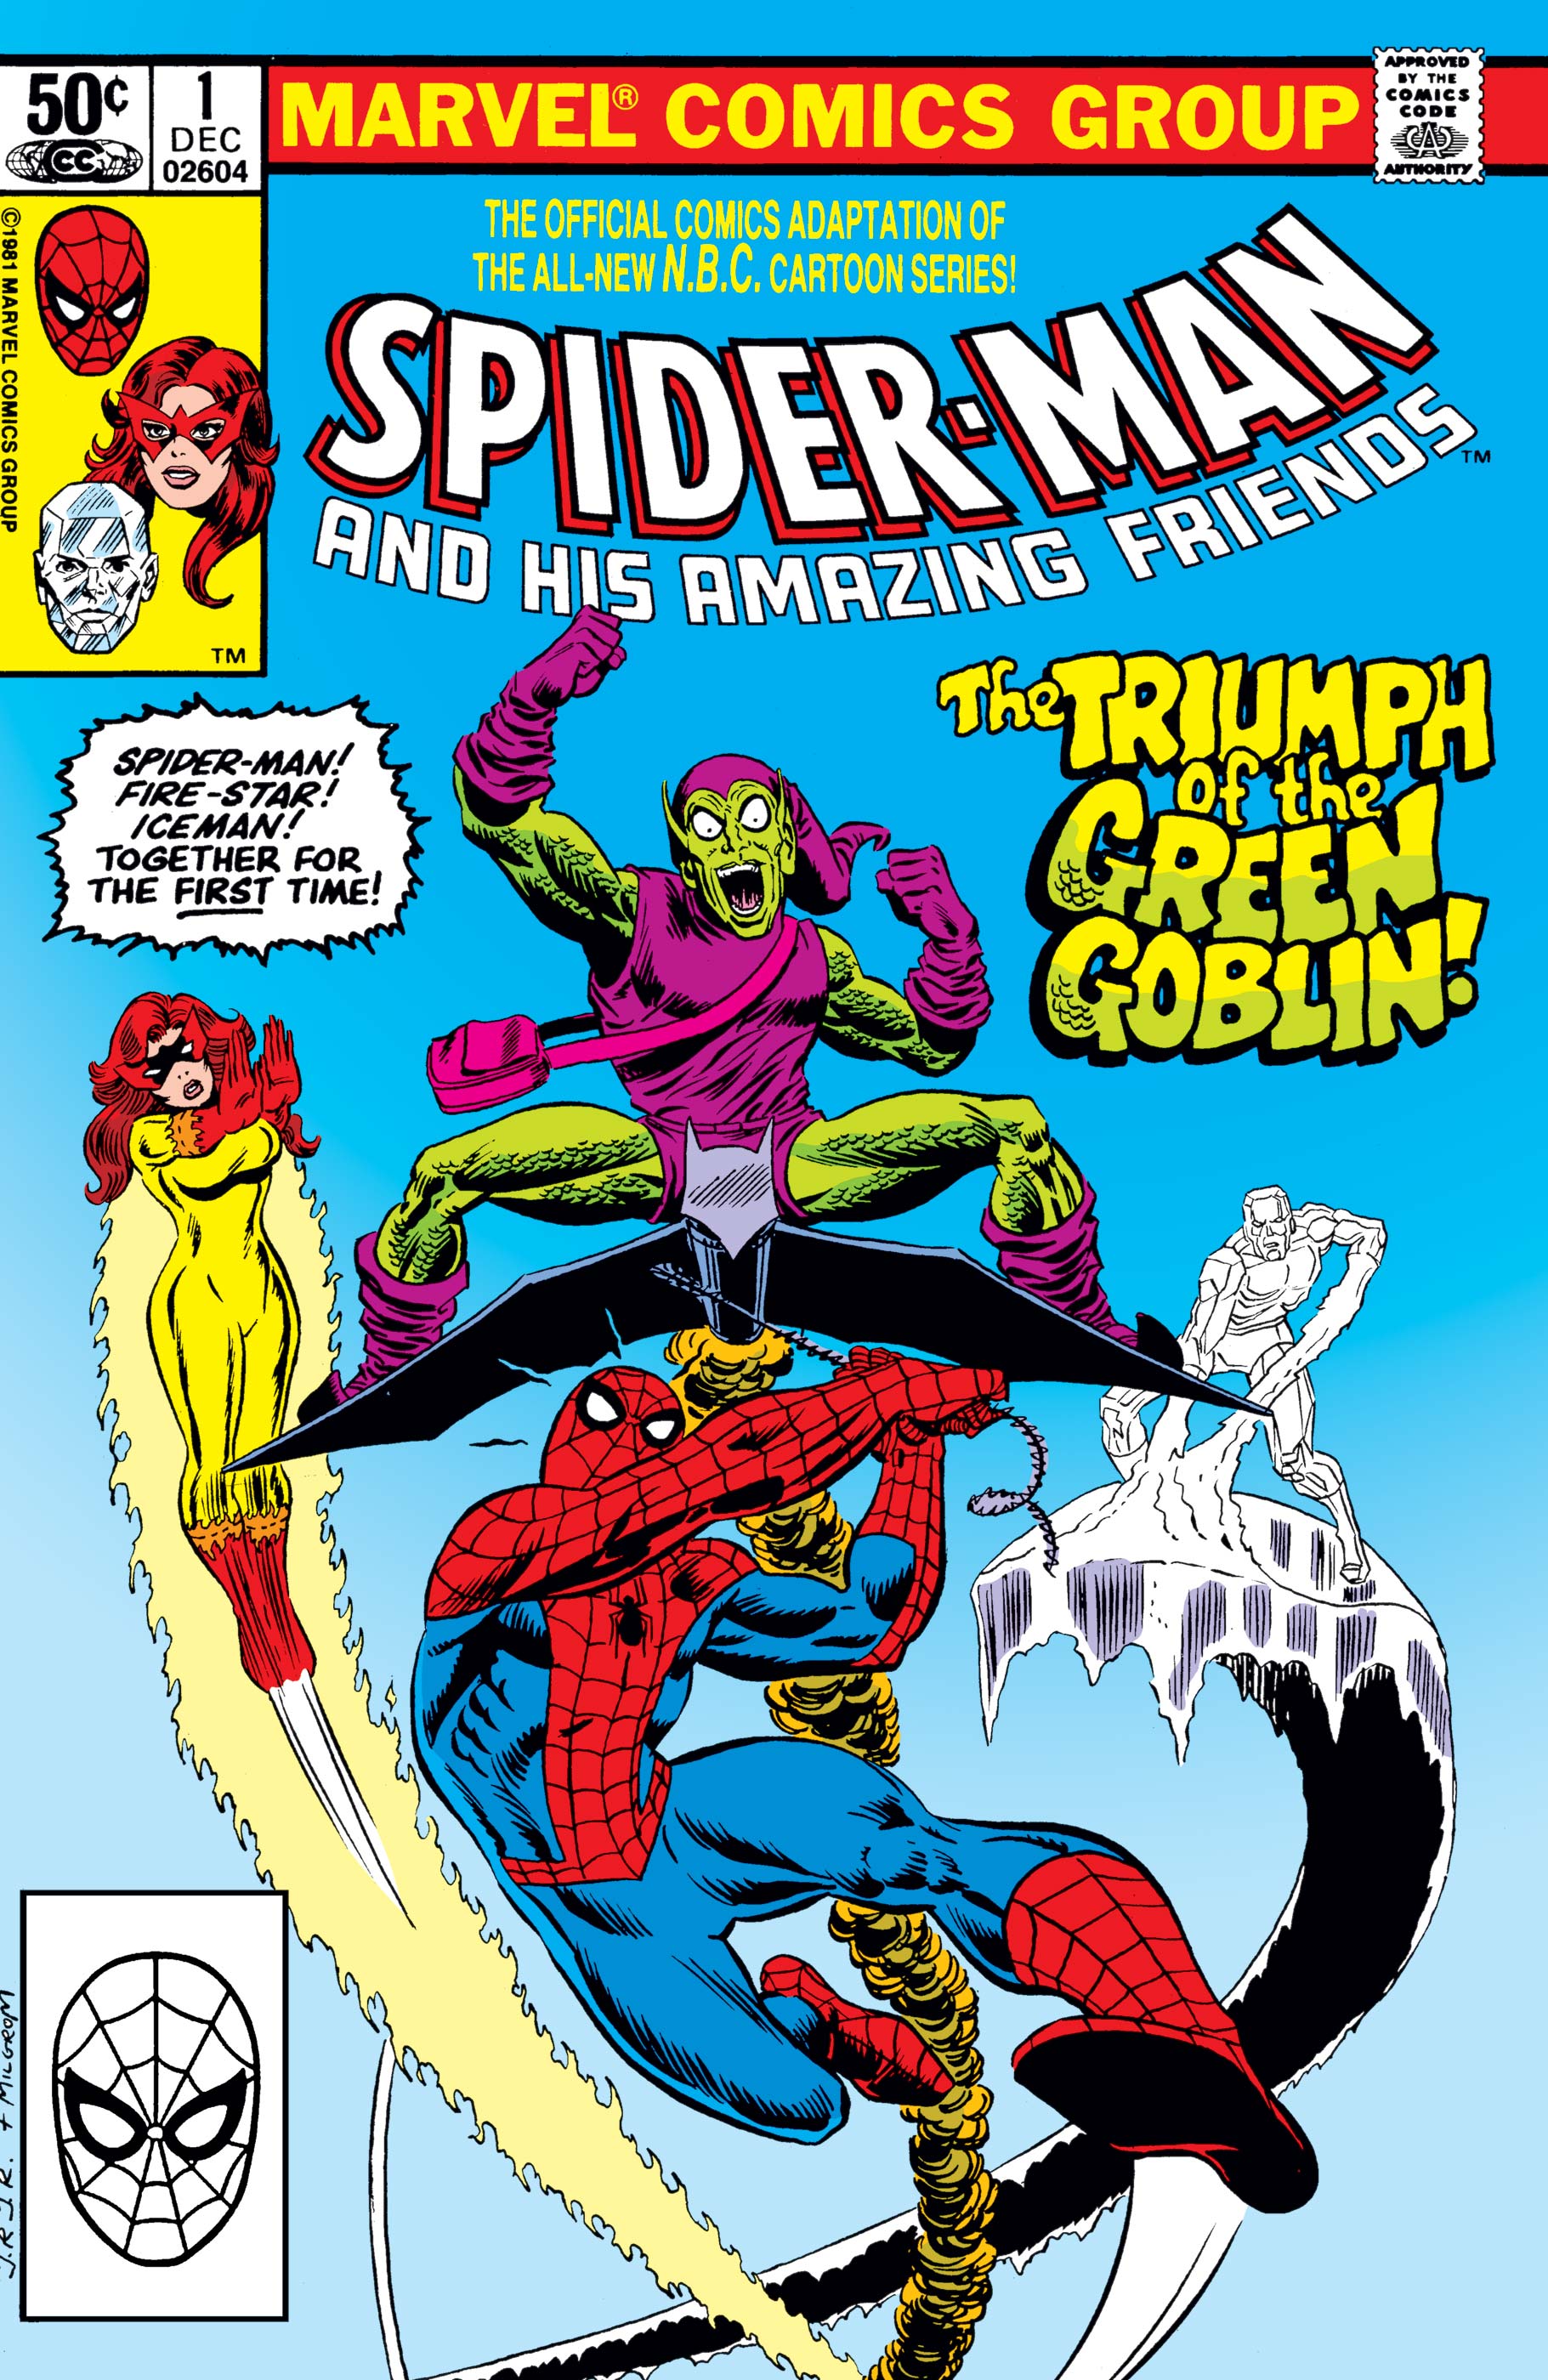 Spider-Man and His Amazing Friends (1981) #1